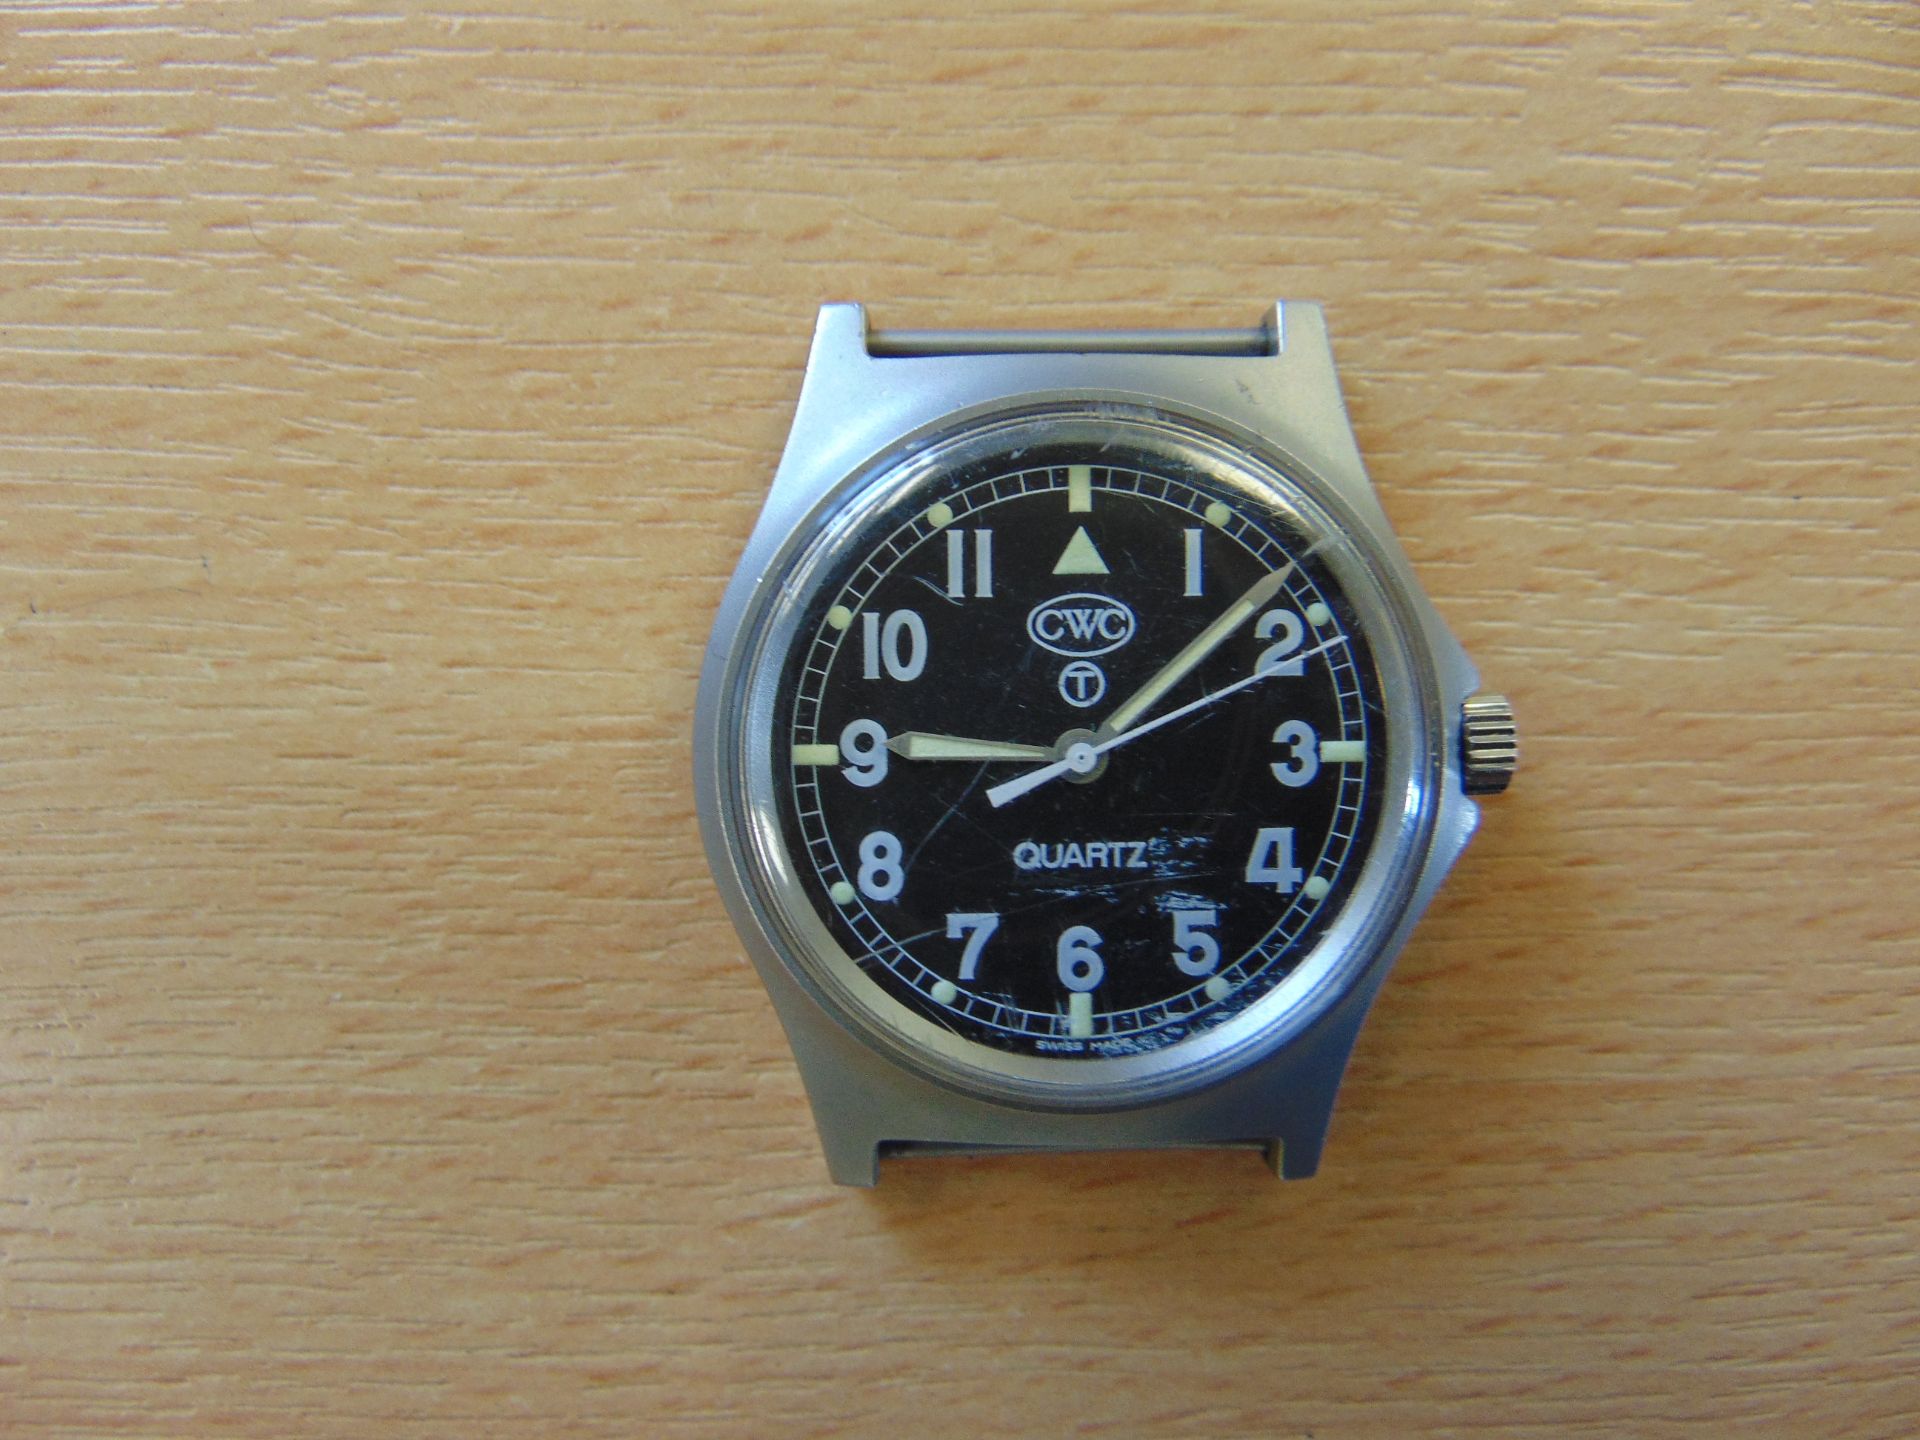 CWC W10 SERVICE WATCH UNISSUED WITH NATO MARKINGS DATED 1997 - Image 2 of 7